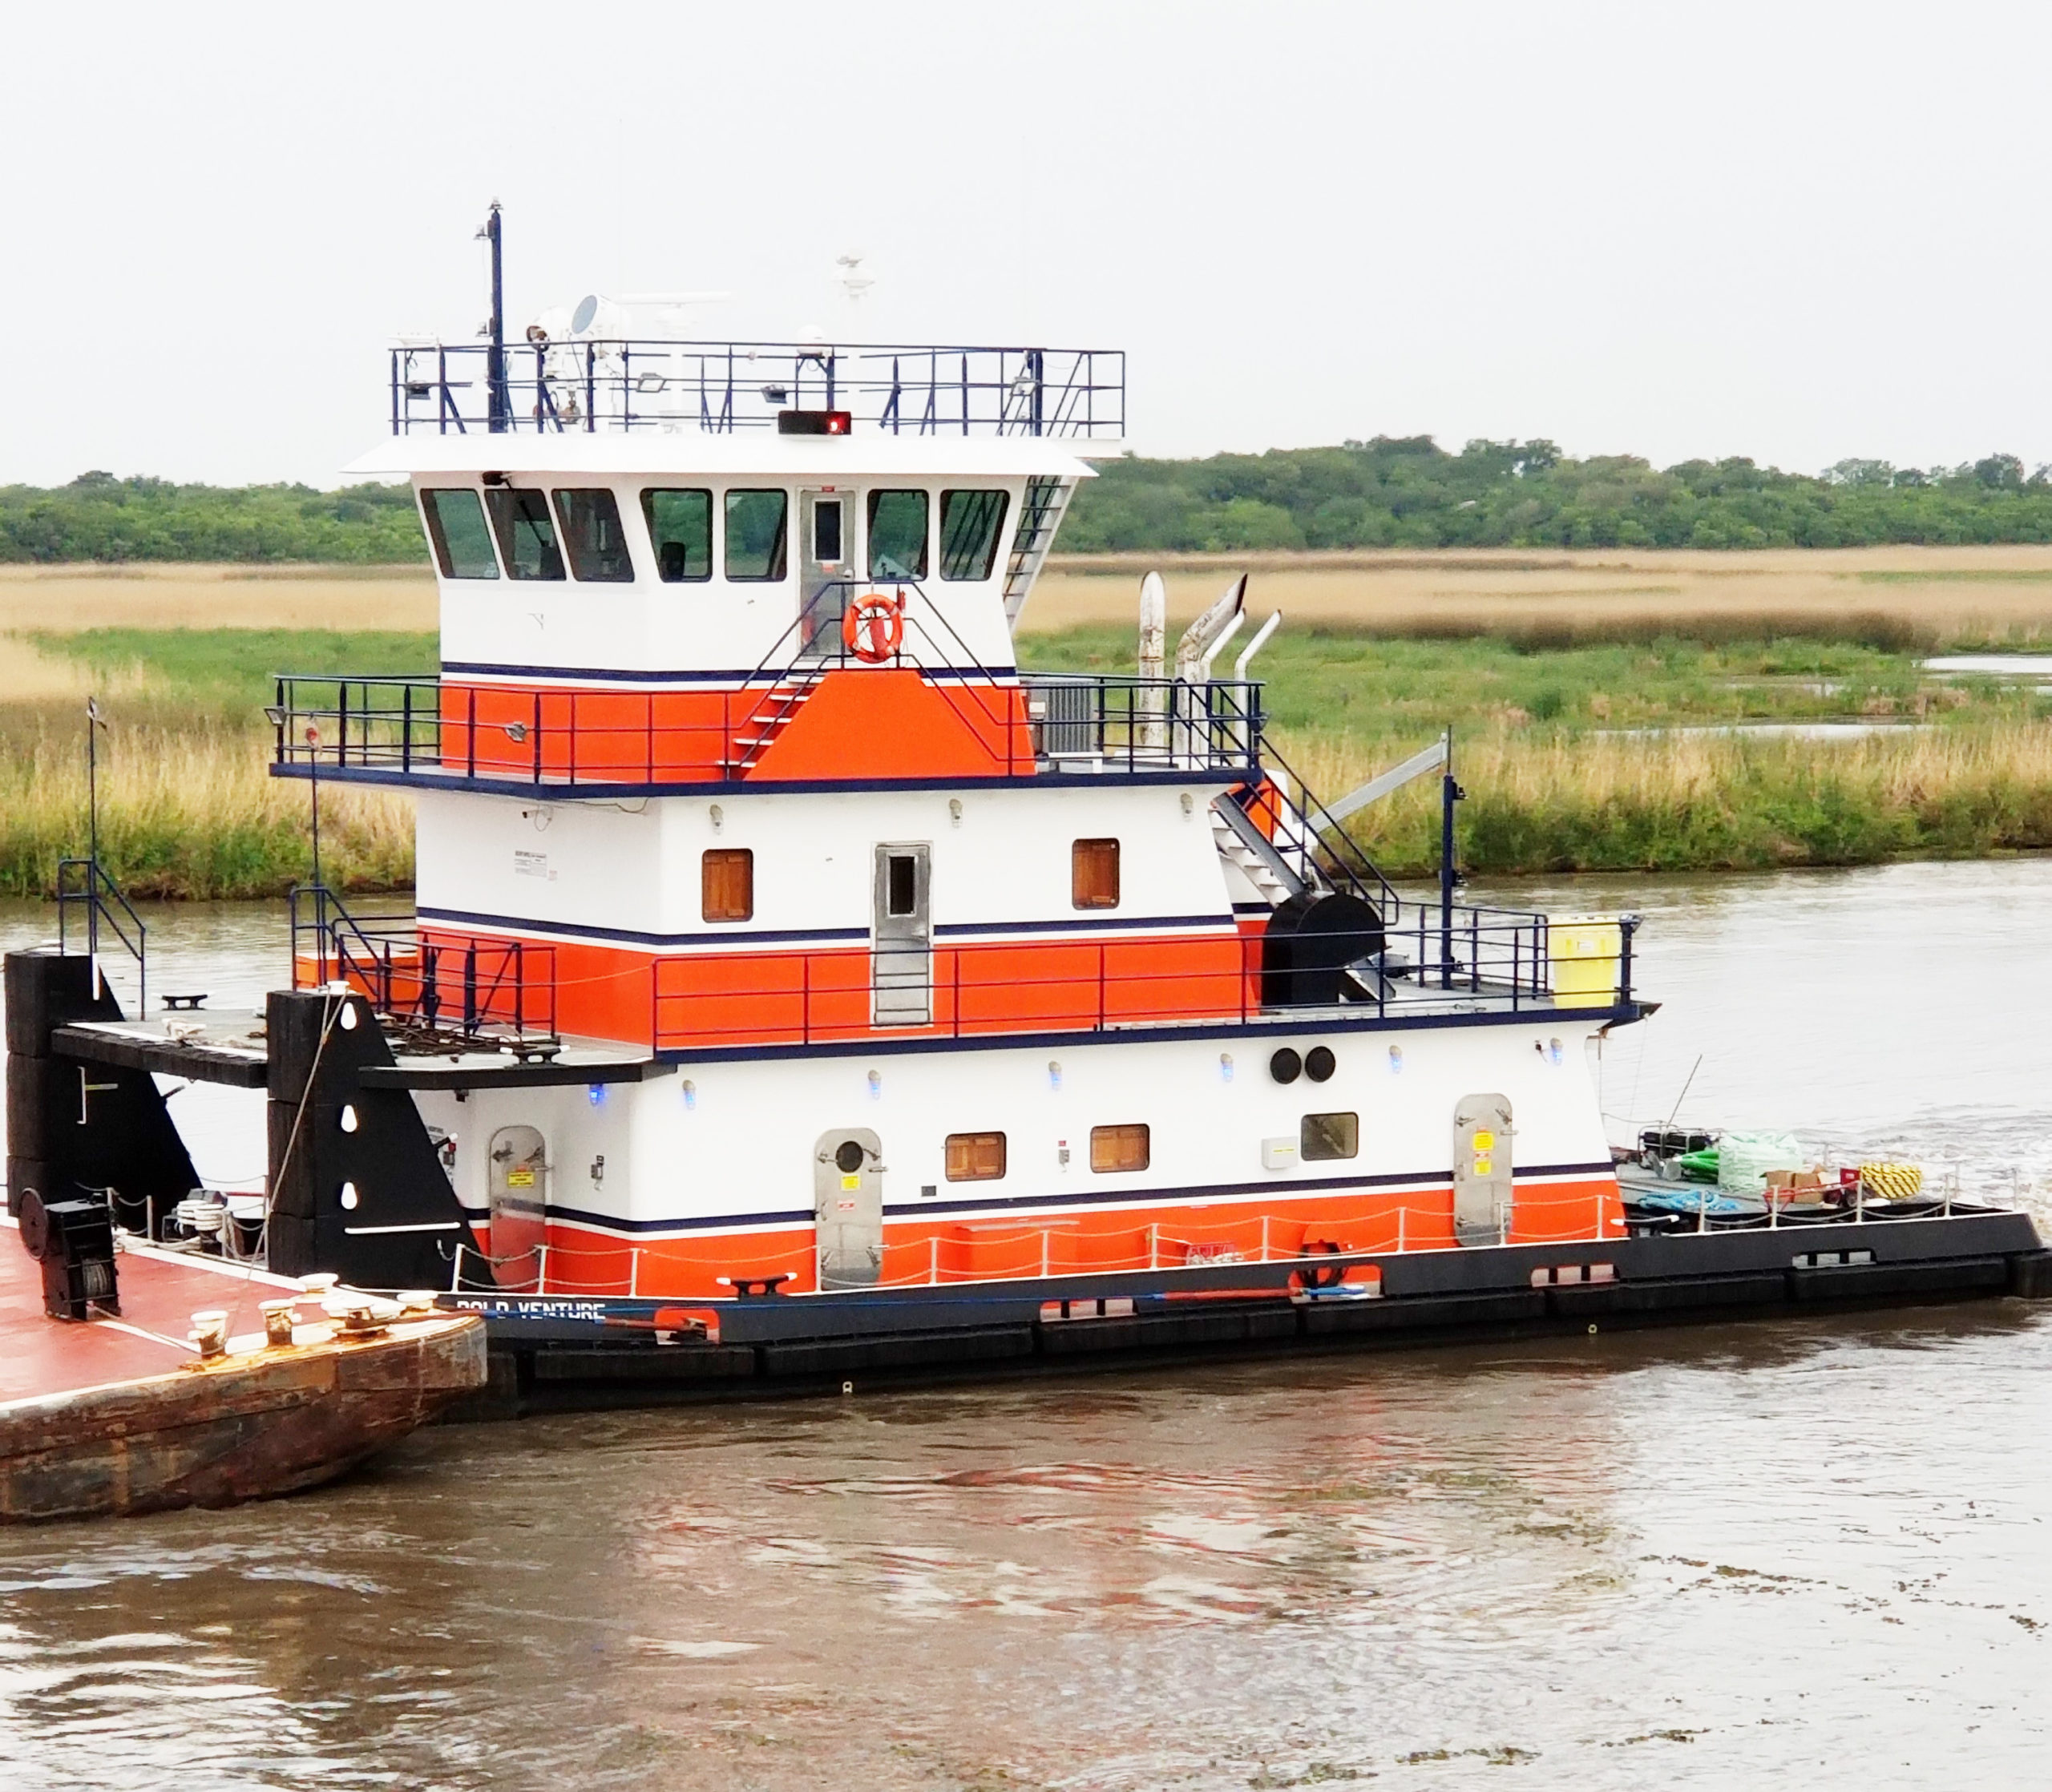 Pushboat "Bold Venture" - Turn Services